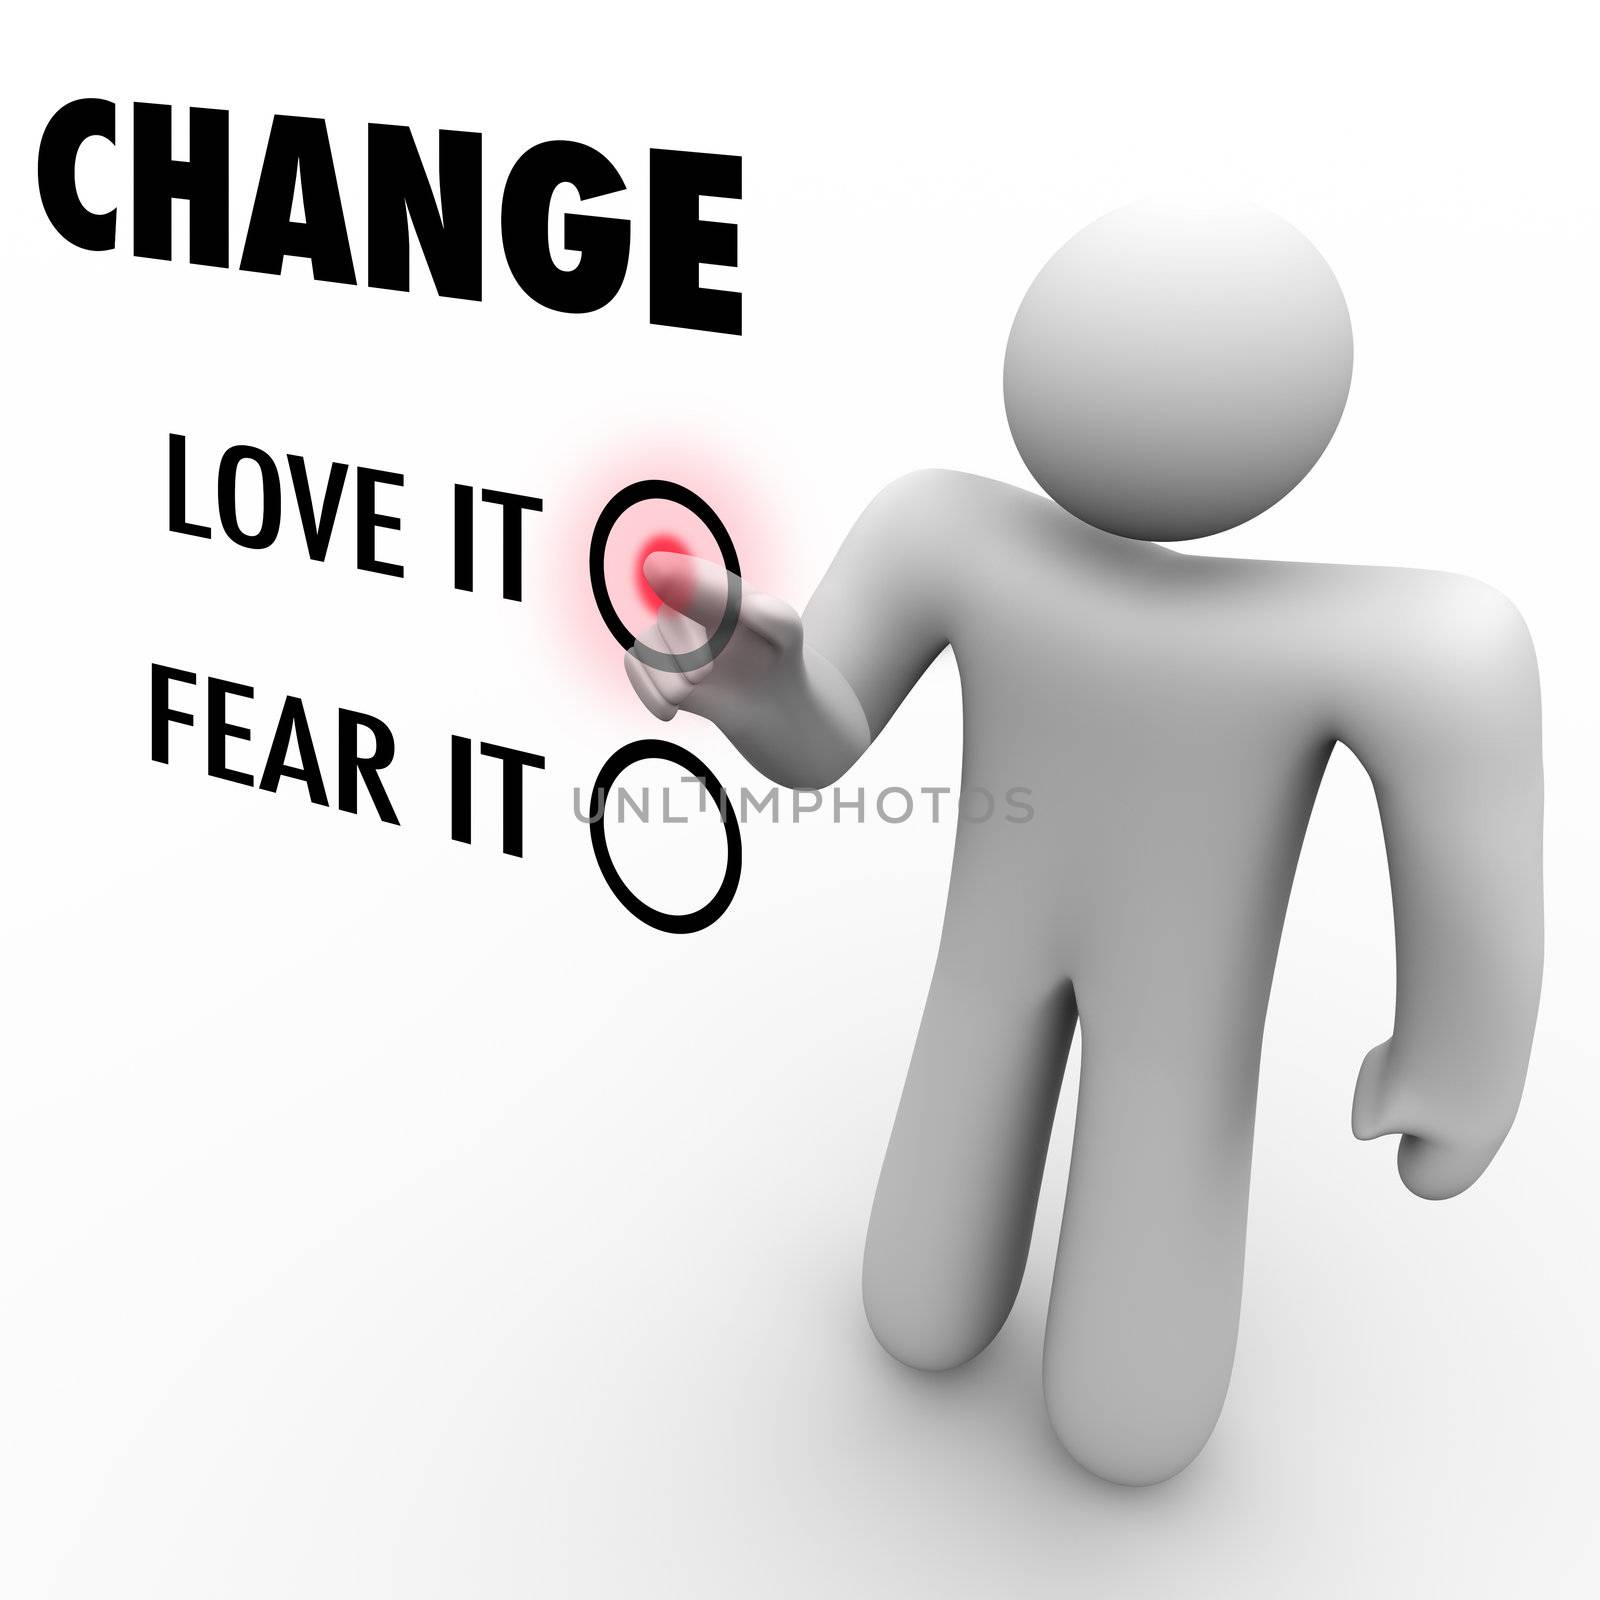 A man presses a button beside the word Change when asked to choose between loving or fearing change